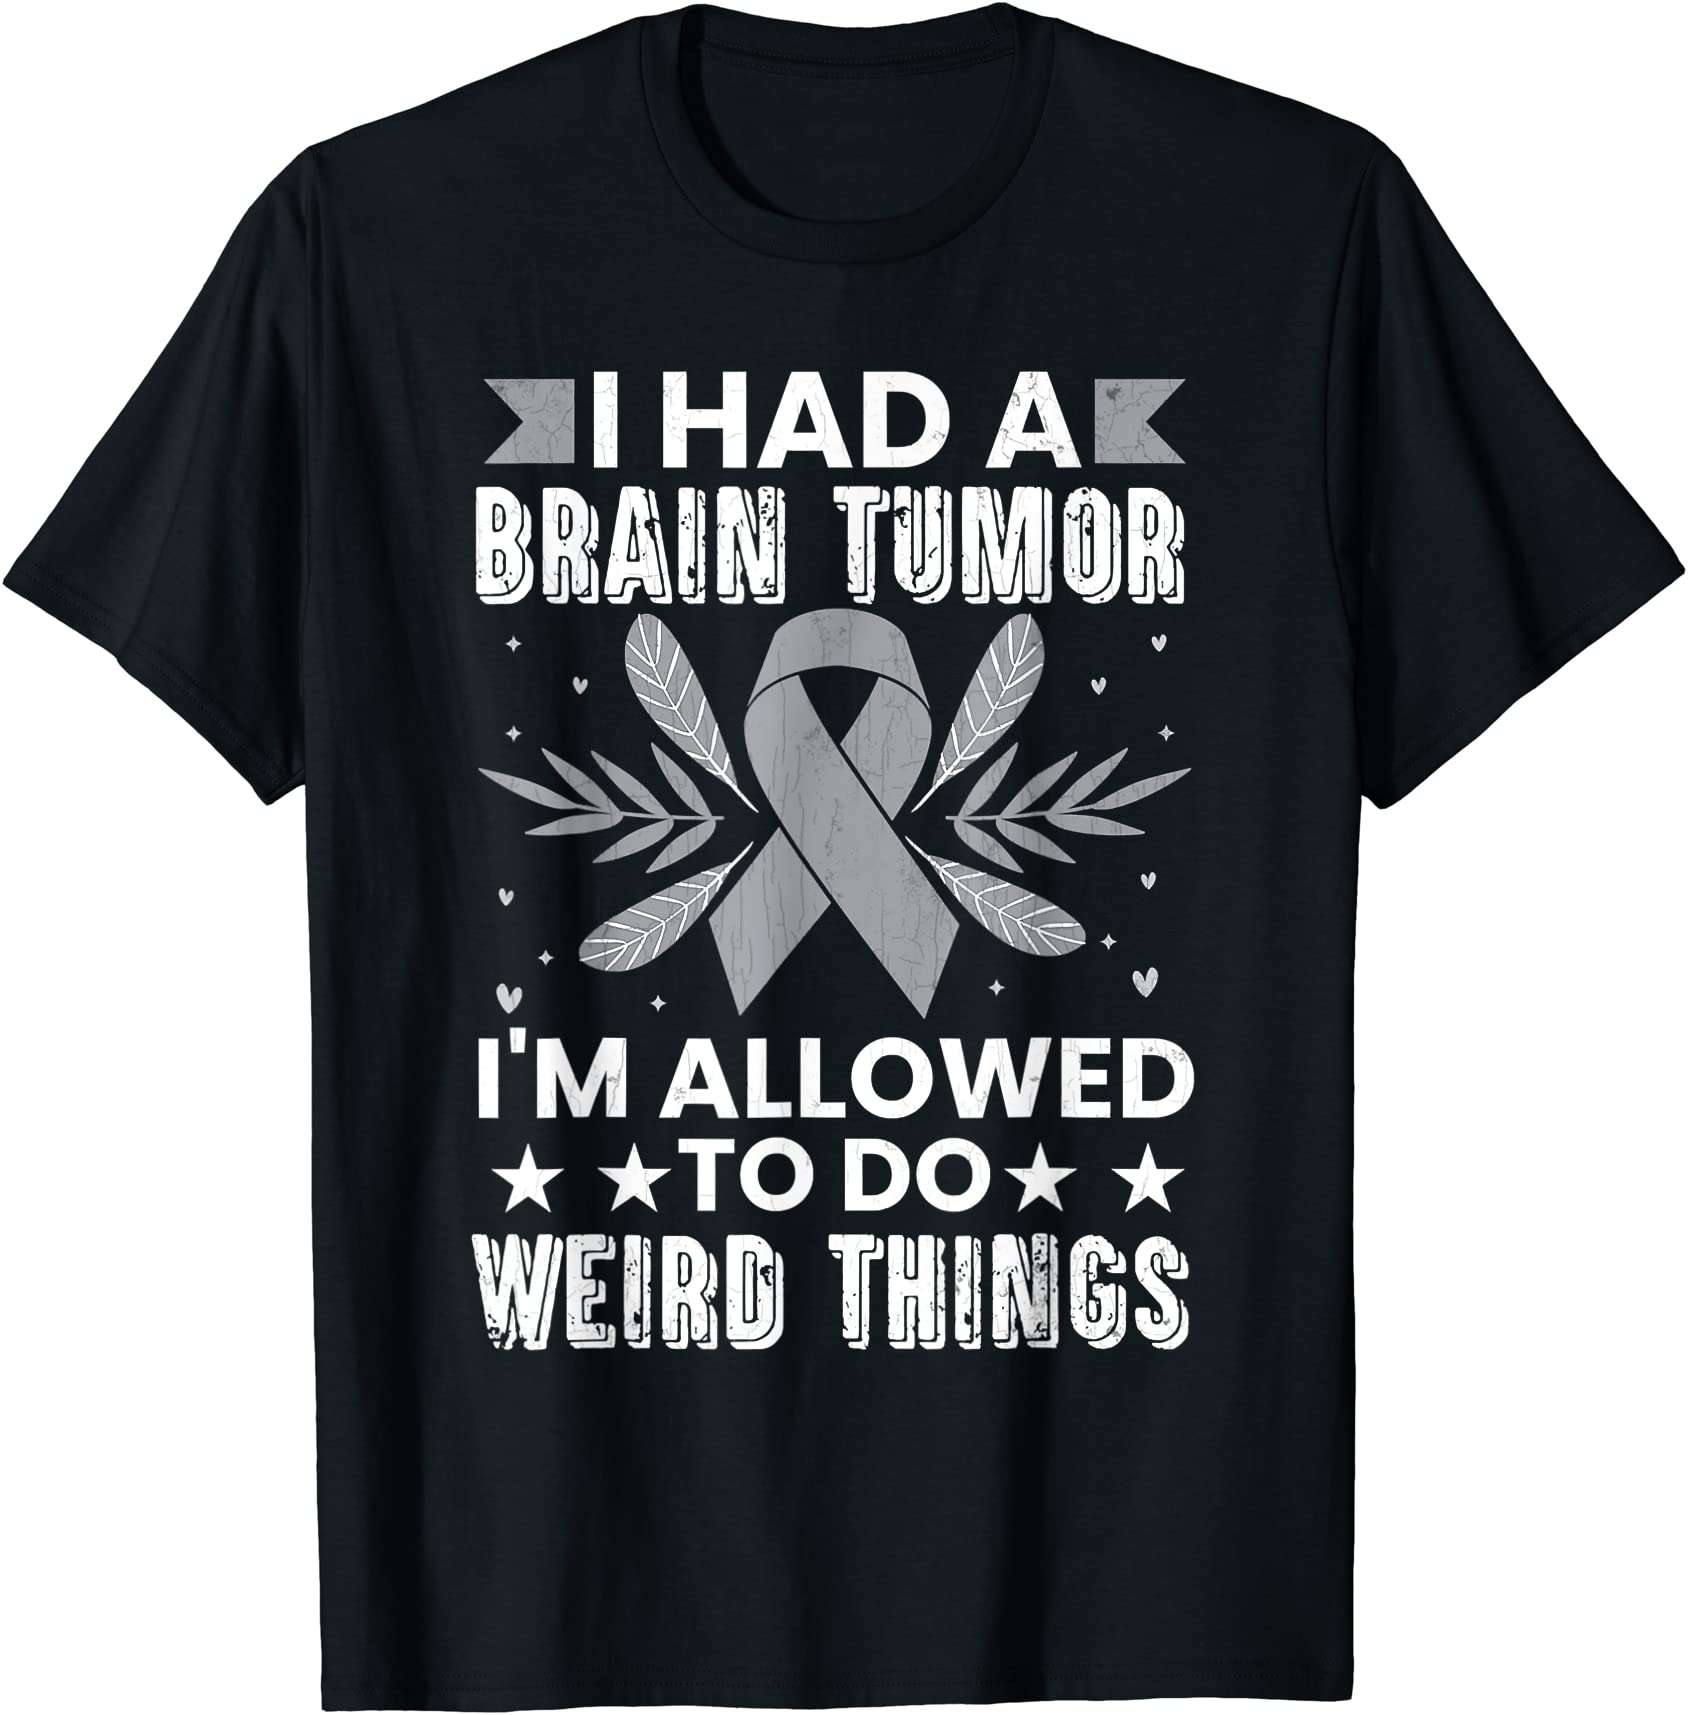 i had a brain tumor brain cancer awareness support graphic t shirt men ...